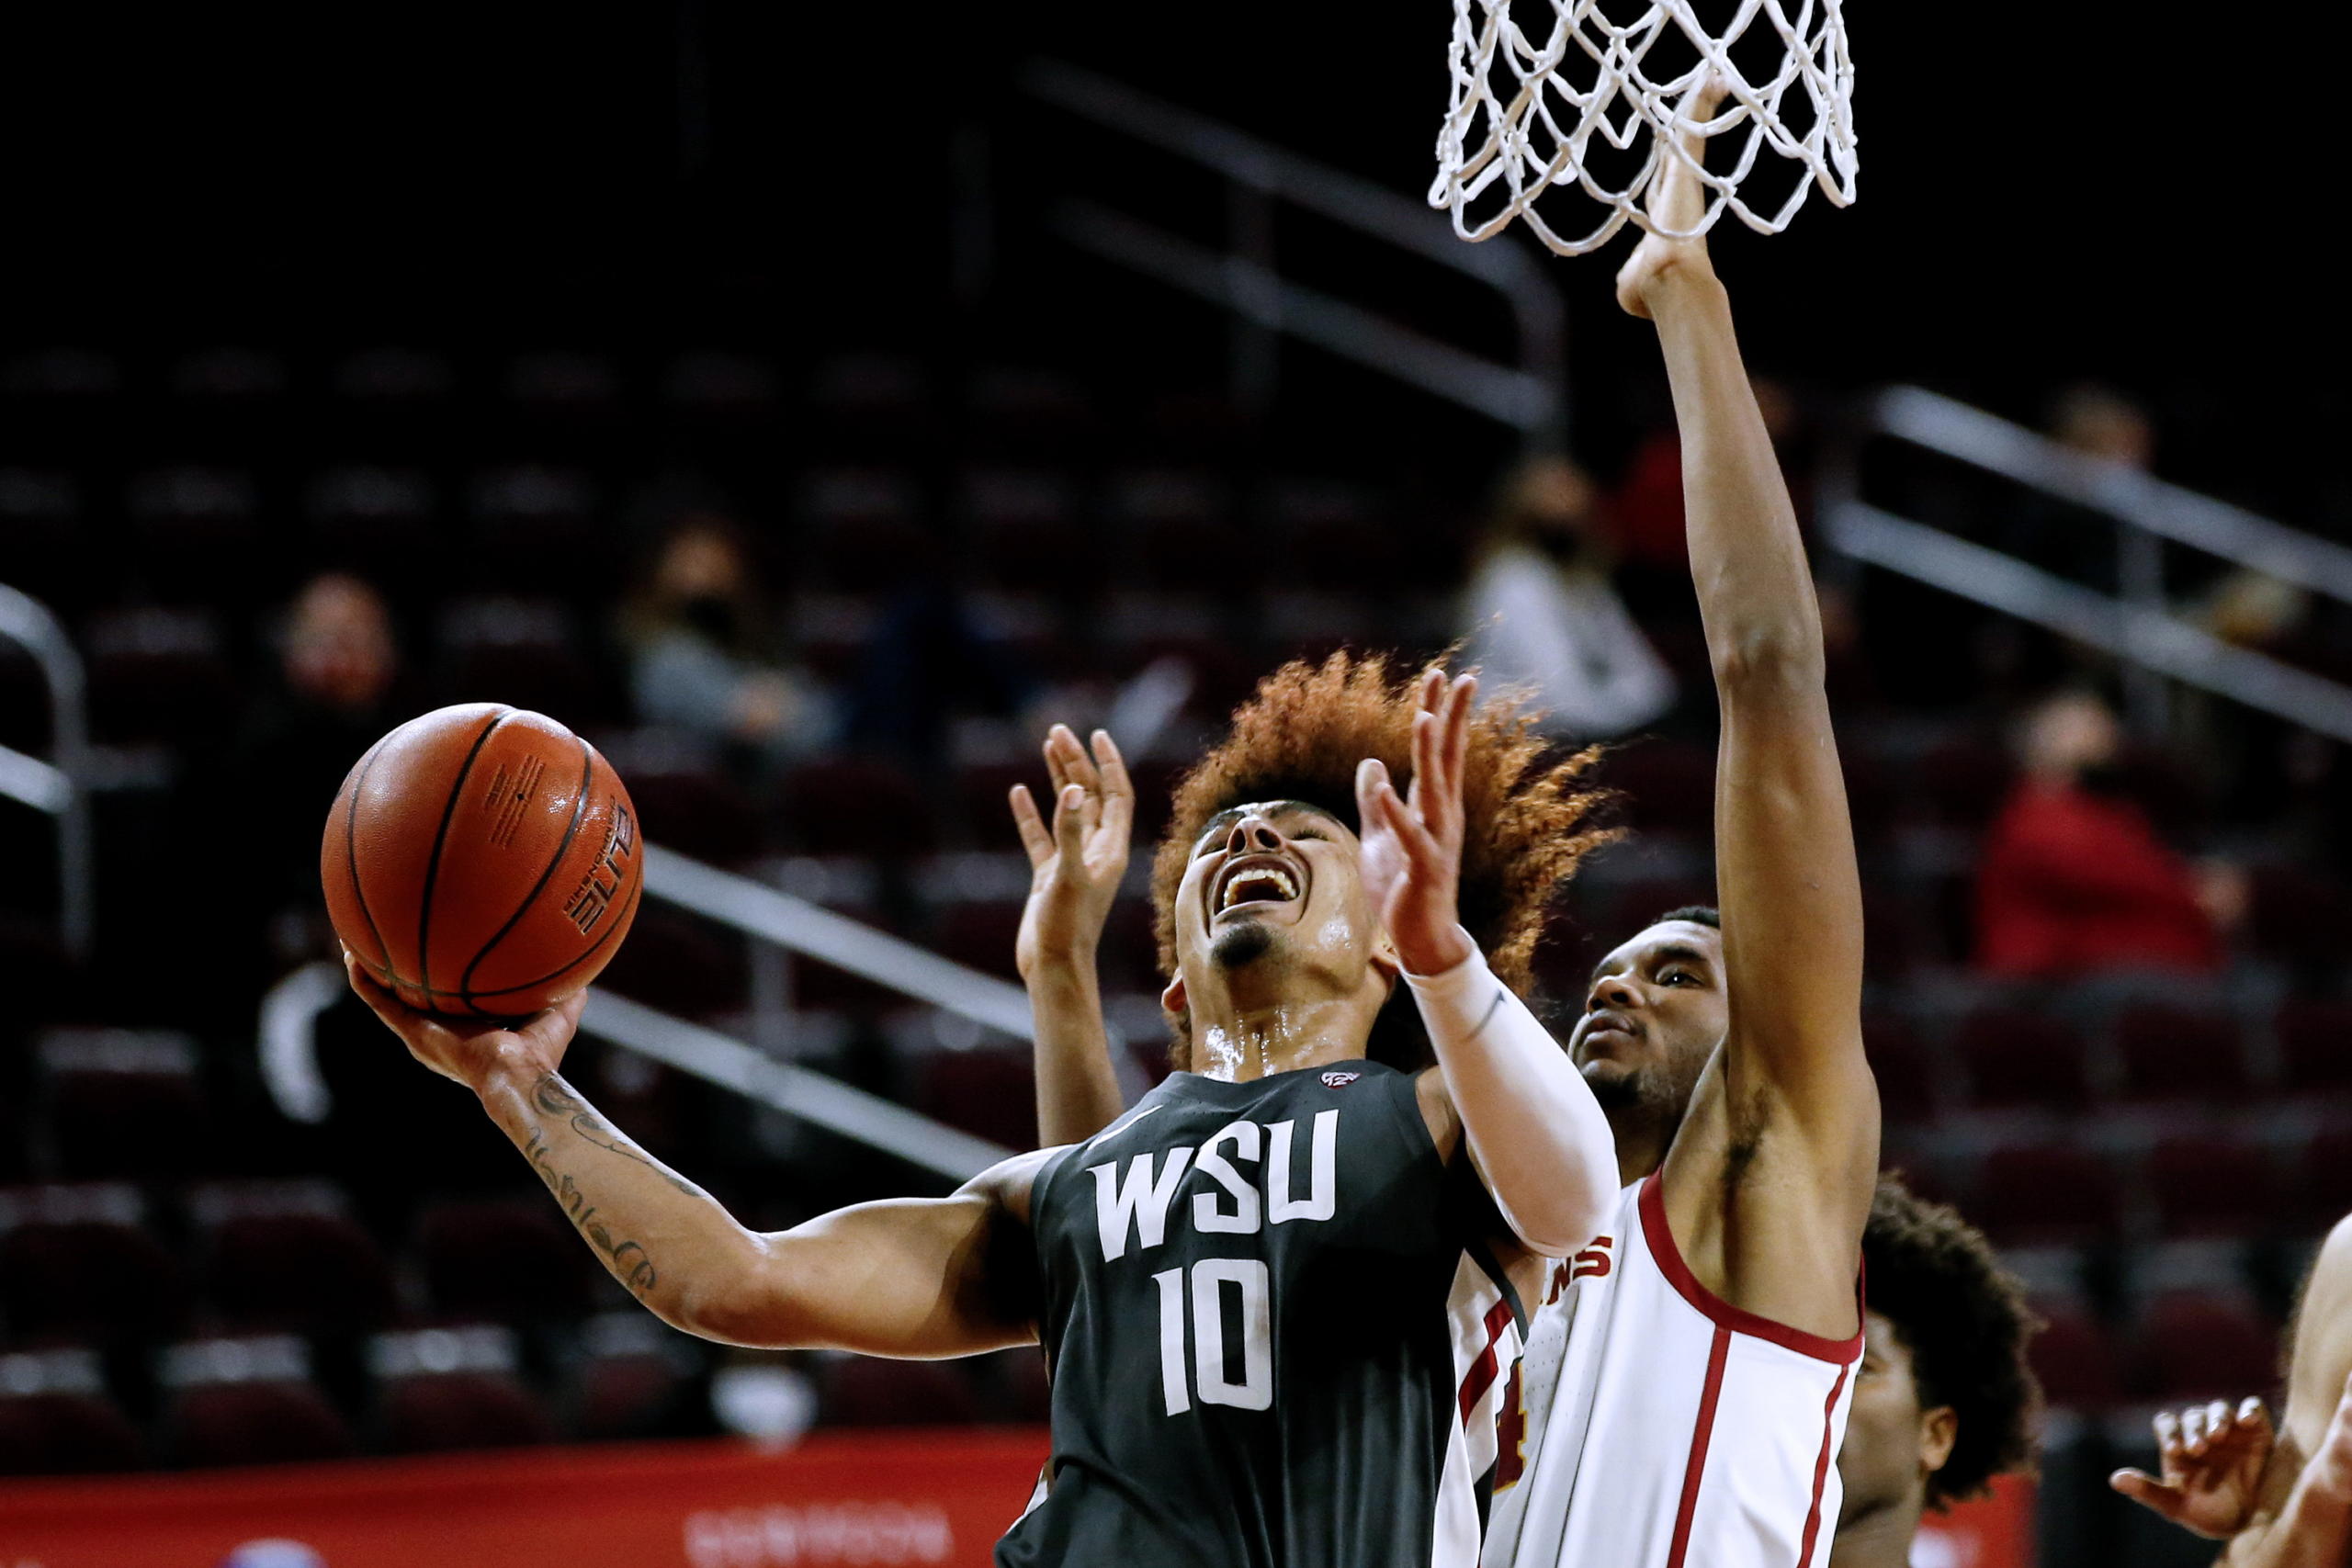 Washington State guard Isaac Bonton (10) goes up to basket under pressure from Southern California forward Evan Mobley (4) during the second half of an NCAA college basketball game Saturday, Jan. 16, 2021, in Los Angeles. (AP Photo/Ringo H.W.